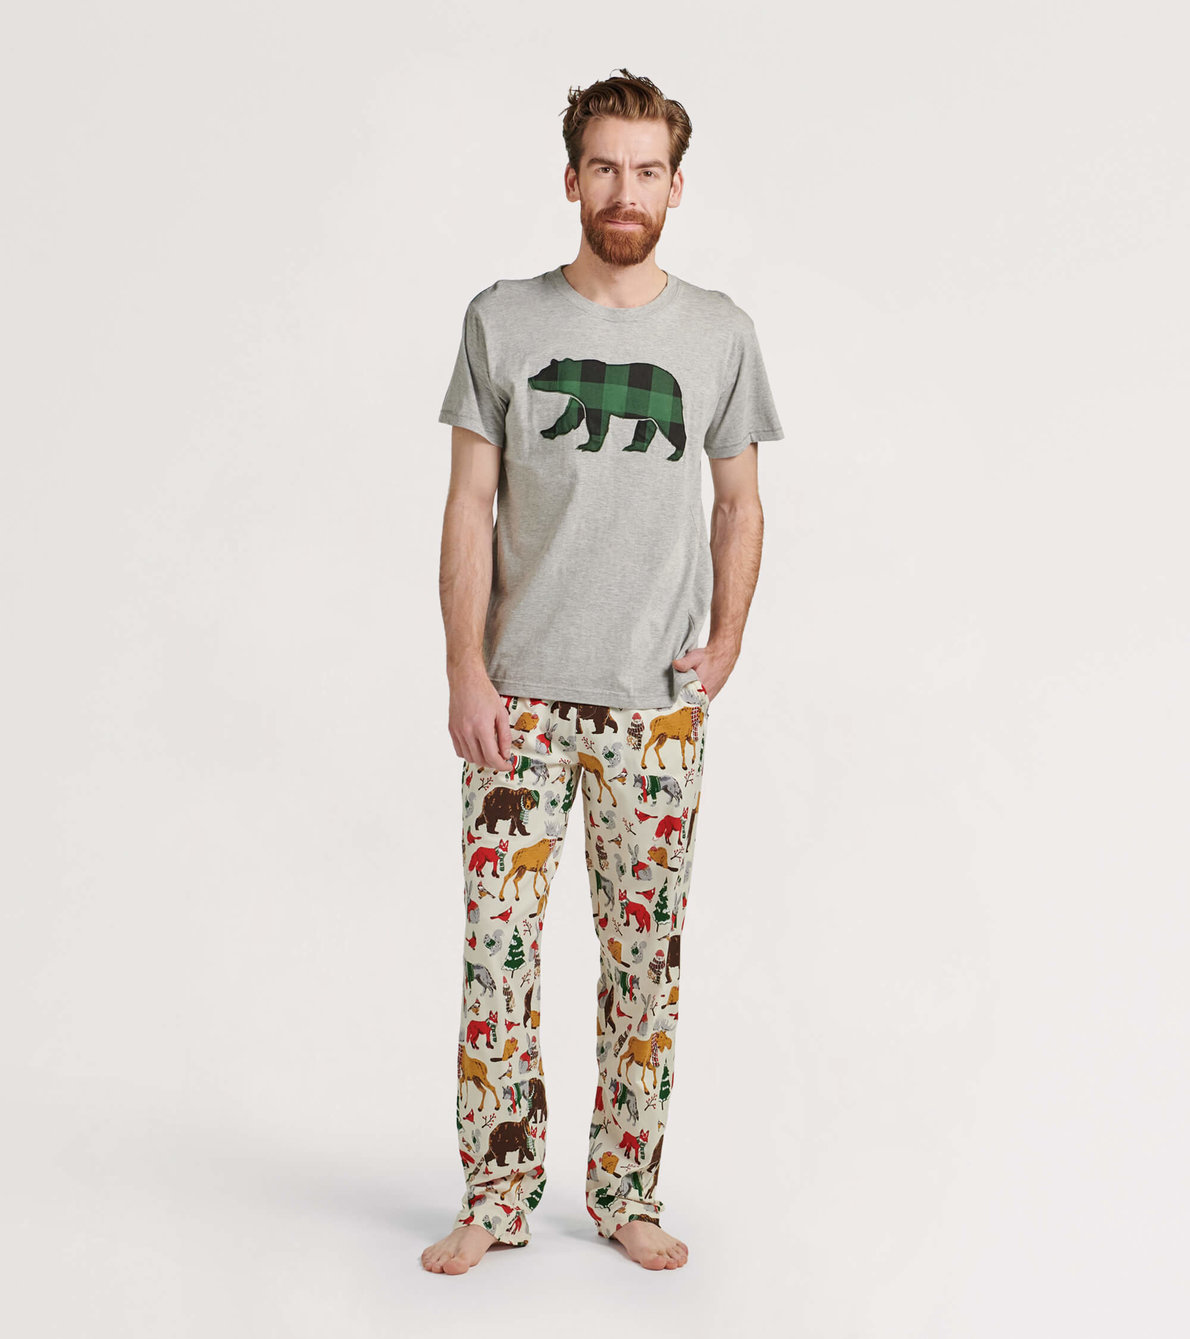 View larger image of Woodland Winter Men's Tee and Pants Pajama Separates